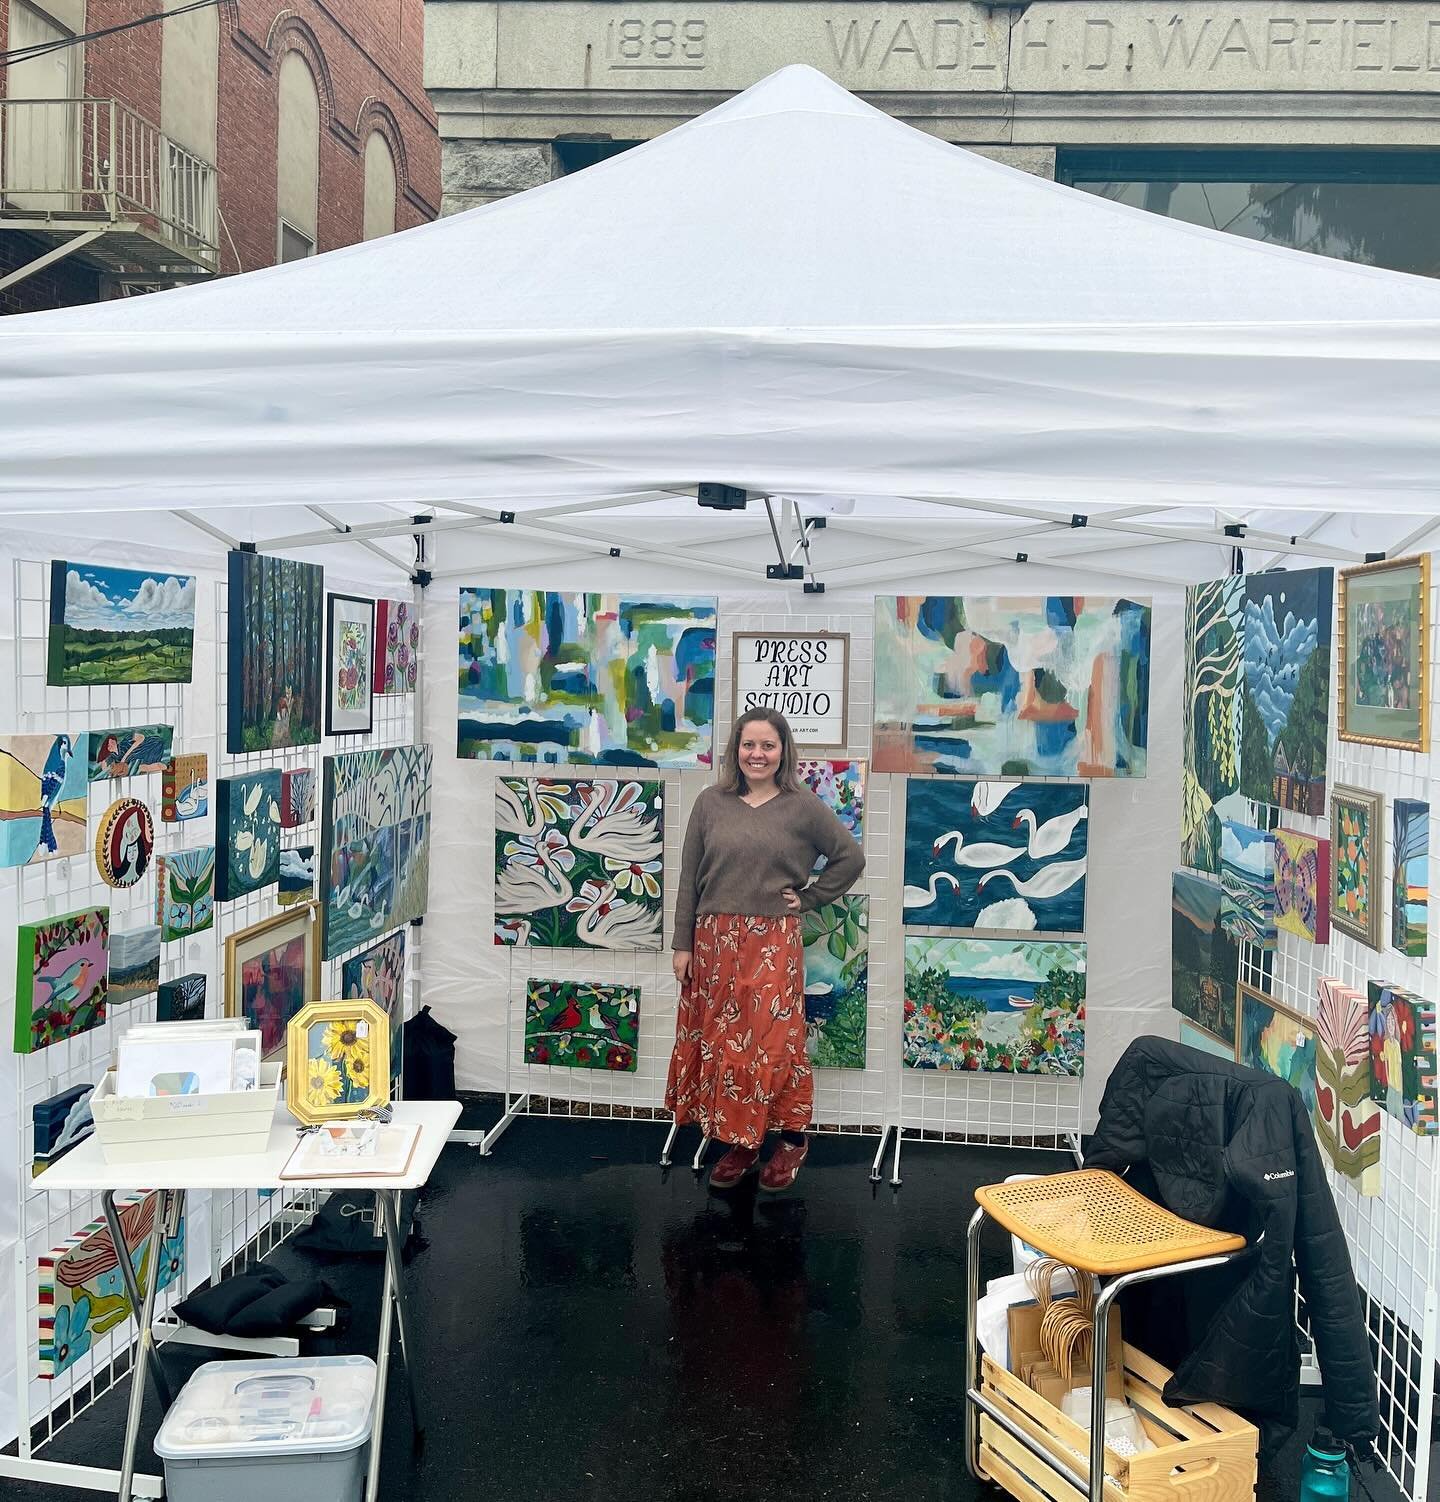 My first art fair of the season was a wet one. Setting up for an event like this in the rain is not for the faint of heart. I think you just have to embrace it and lean into what it actually is and let go of any expectations. 

After I got set up and